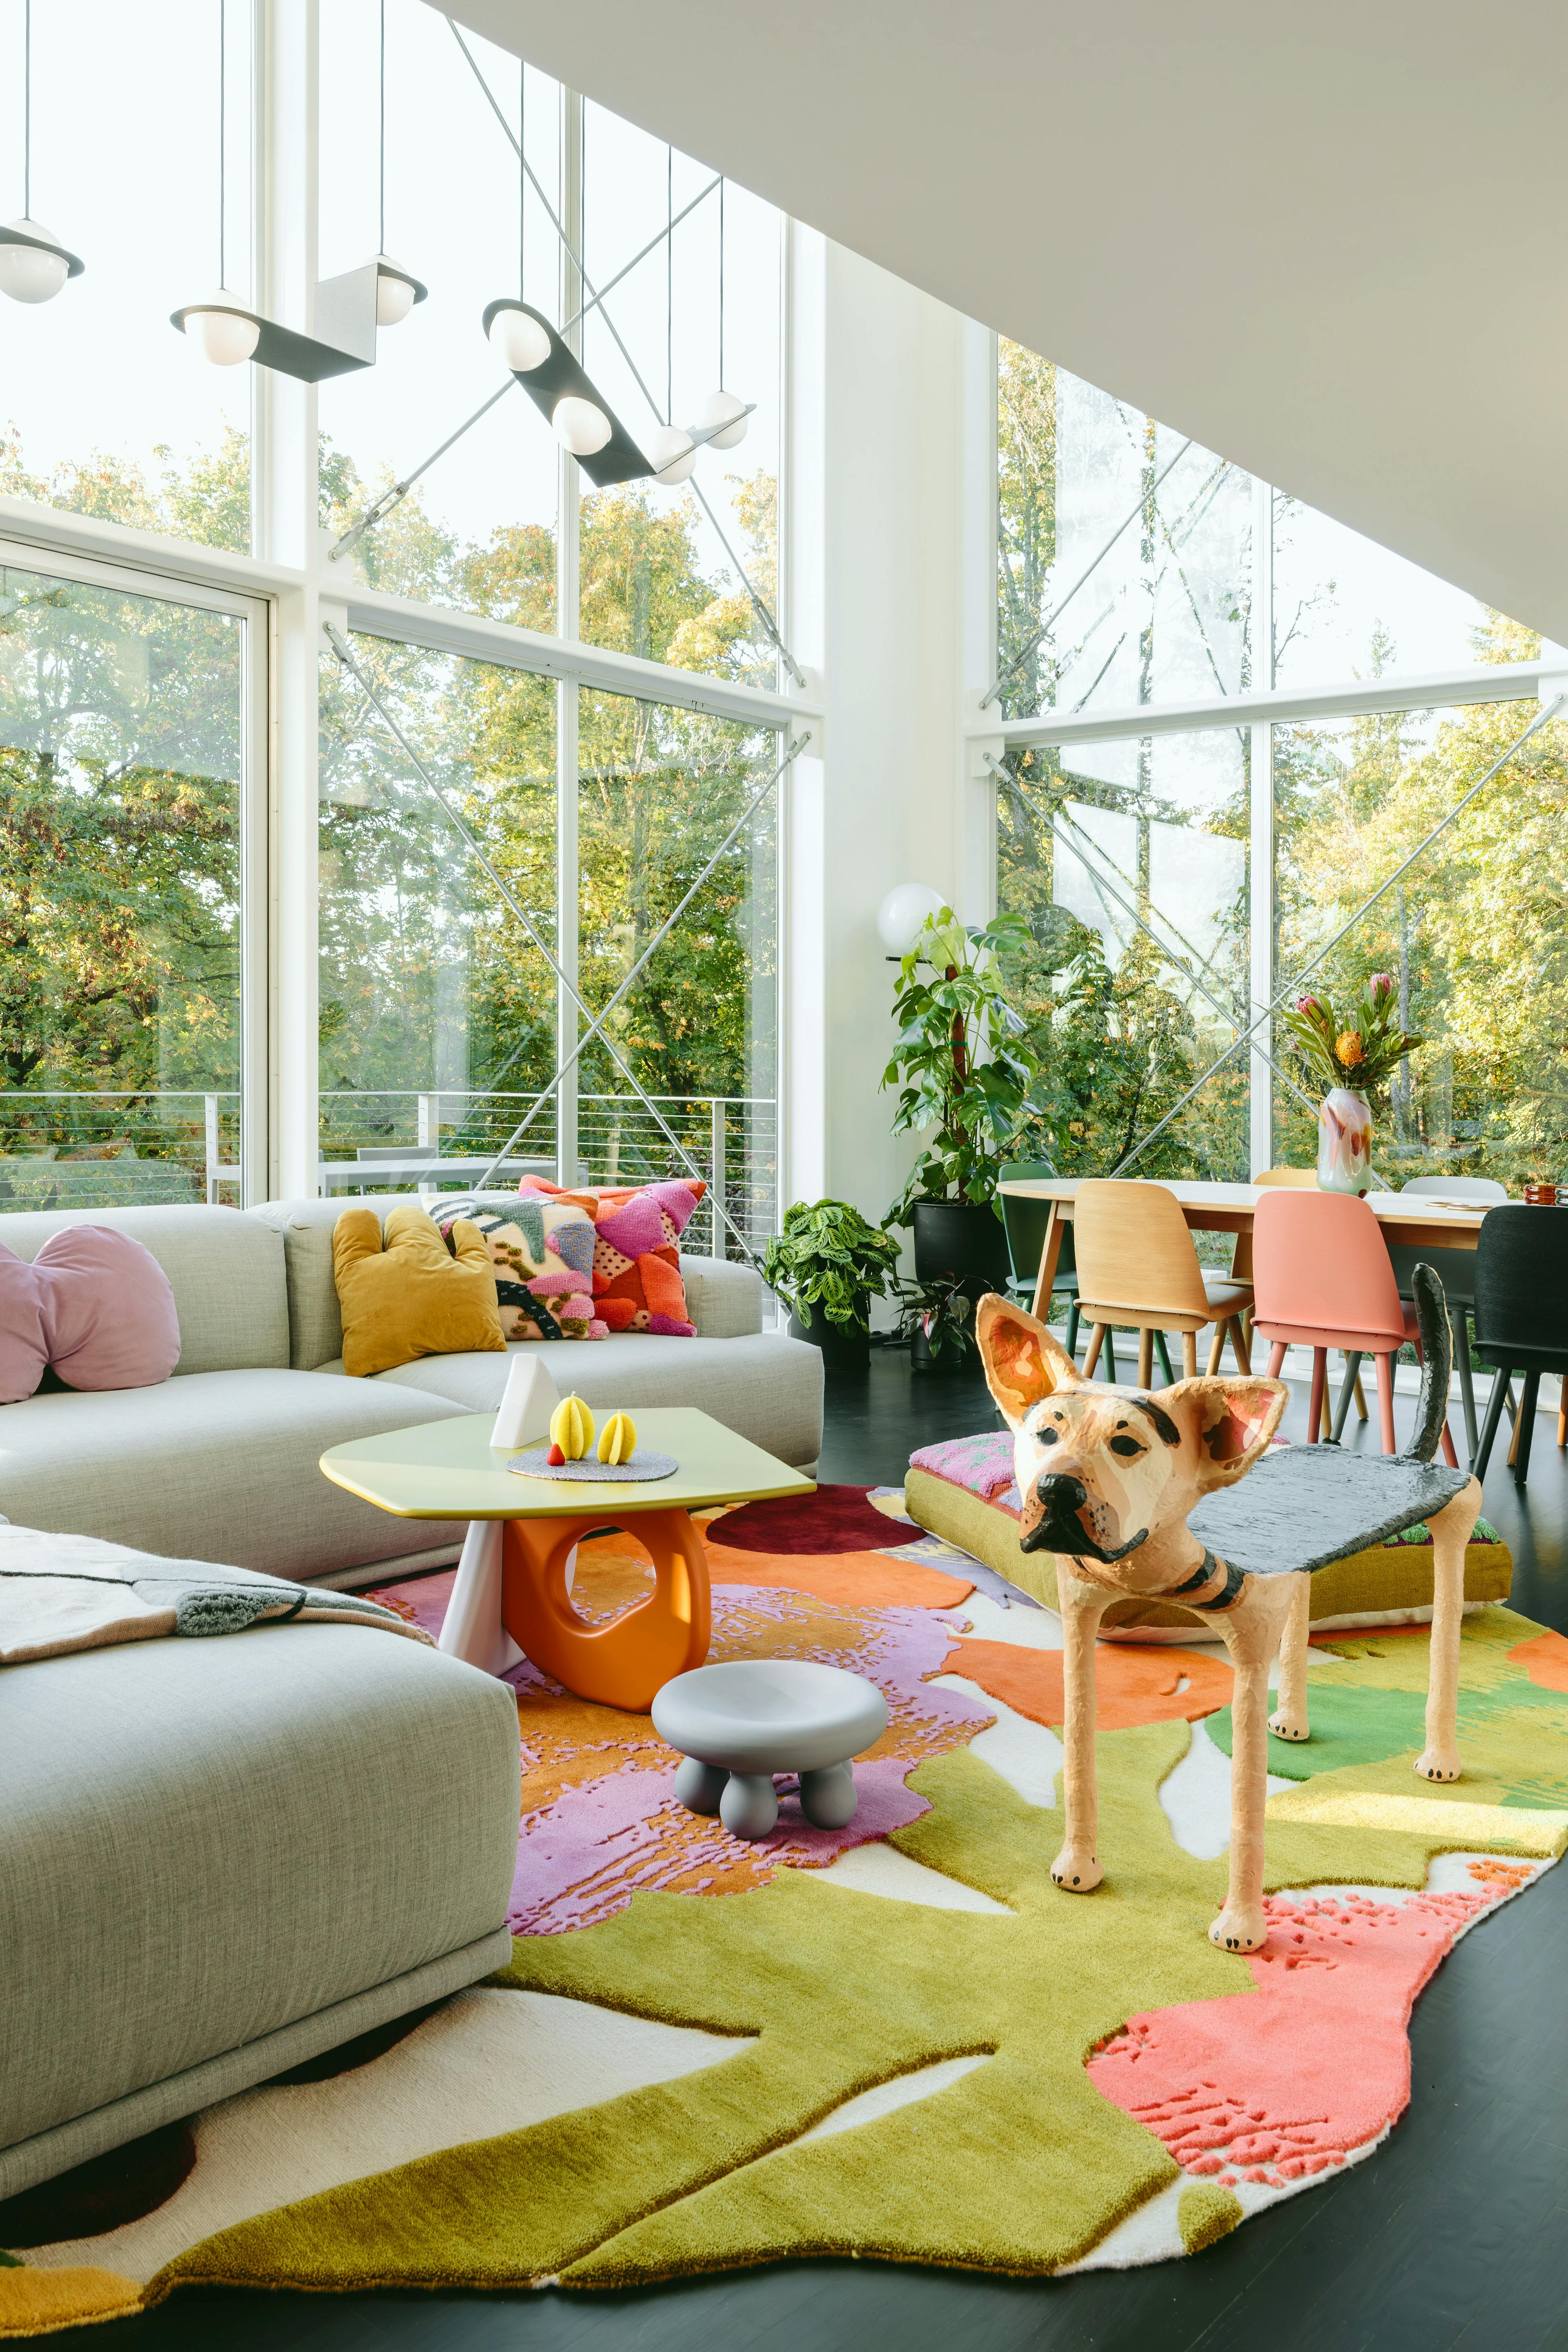 Modern living with floor-to-ceiling windows, complete with a gray sectional and colorful pattern rug.